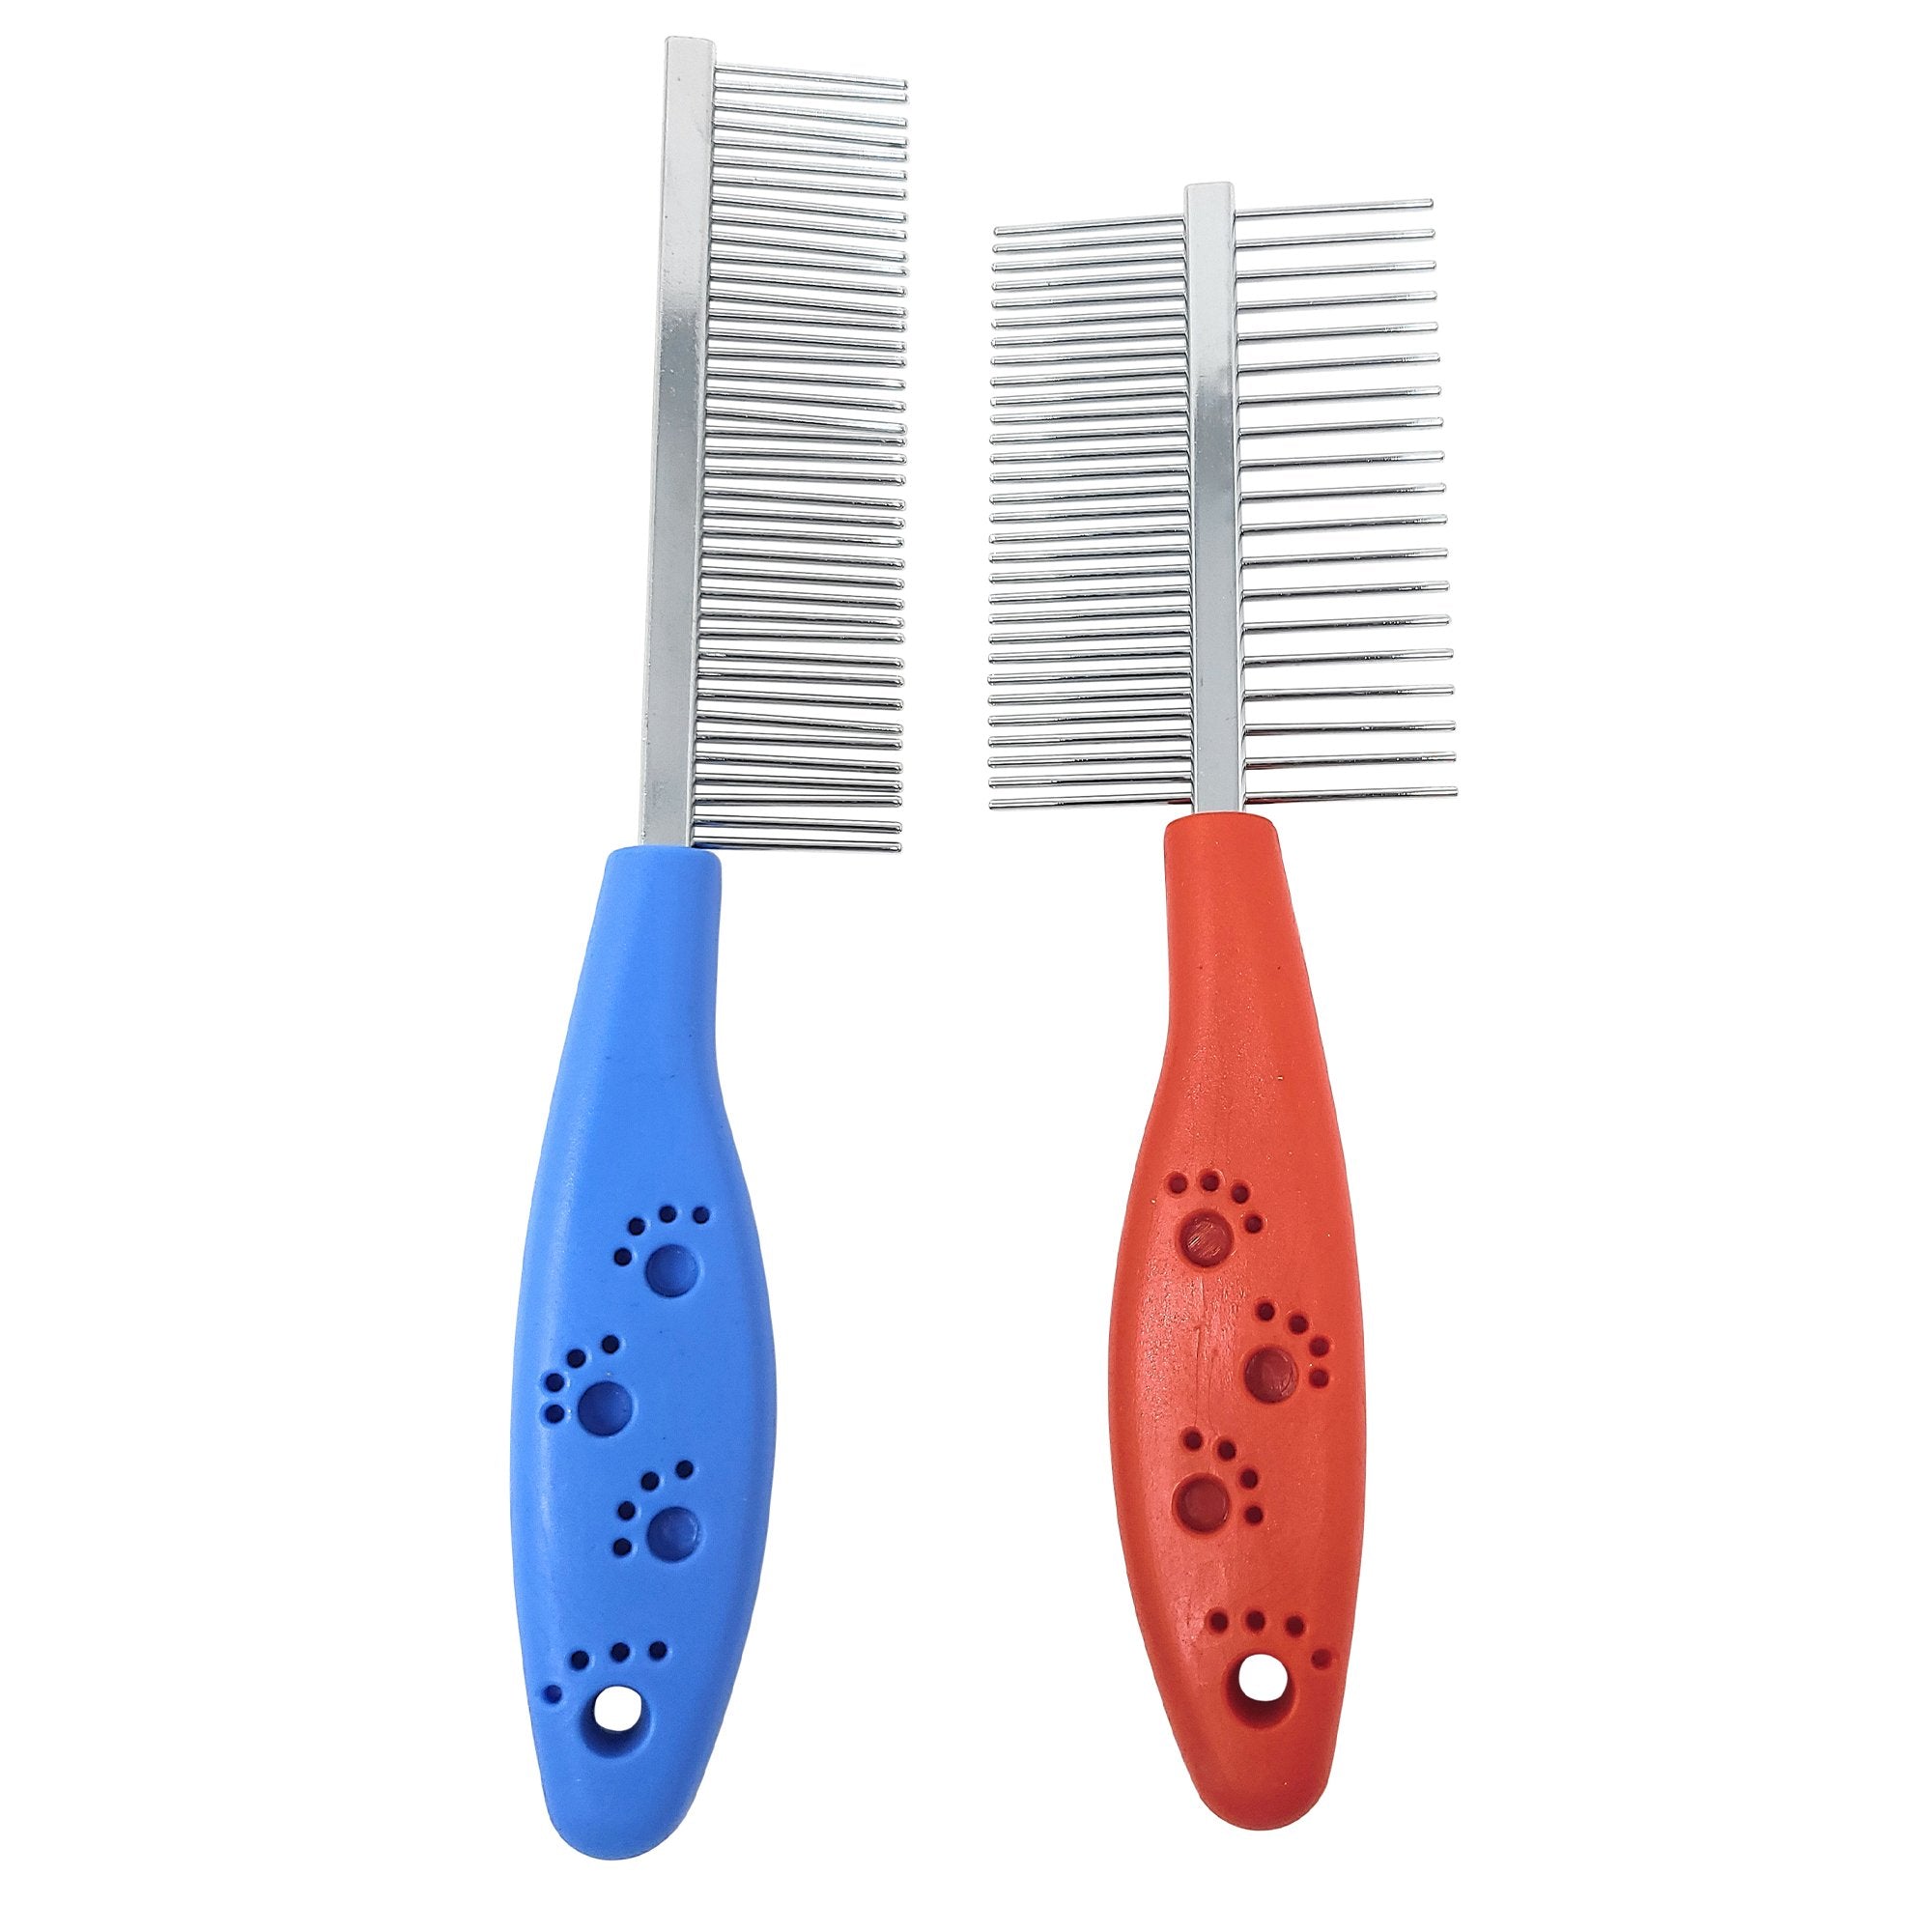 MARS WELLNESS Pet Comb 2 Pack Kit - Single Sided Stainless Steel Teeth and Double Sided Dog and Cat Comb